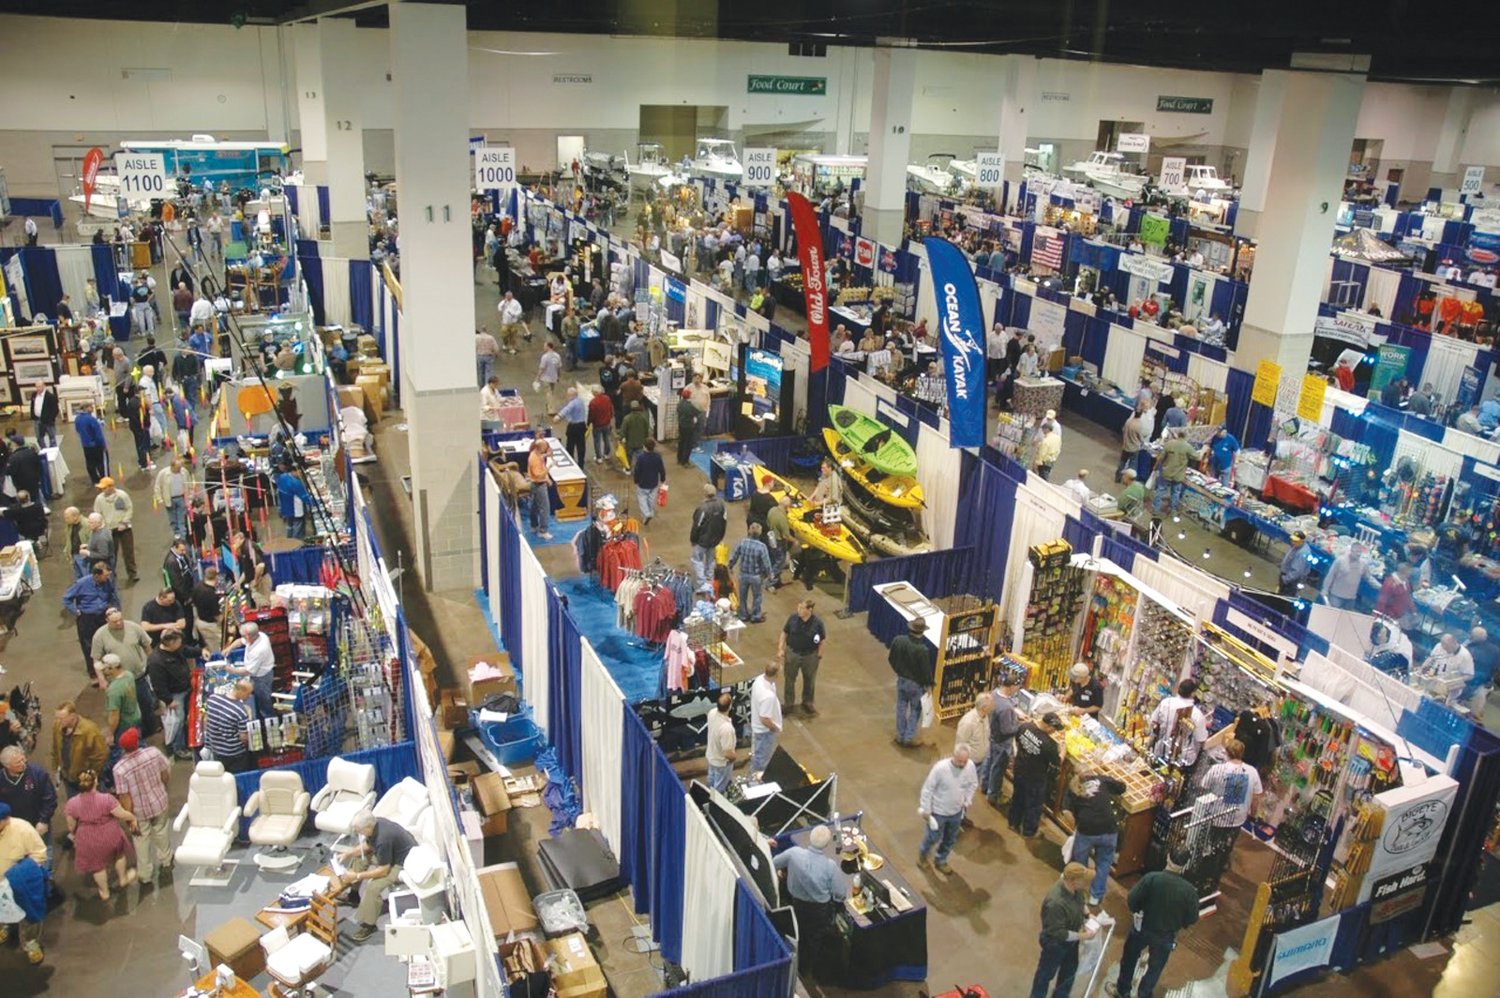 FISHING SHOW: The New England Saltwater Fishing Show, March 10-12 at the Rhode Island Convention Center, will feature 300 booths and free seminars. (Submitted photos)